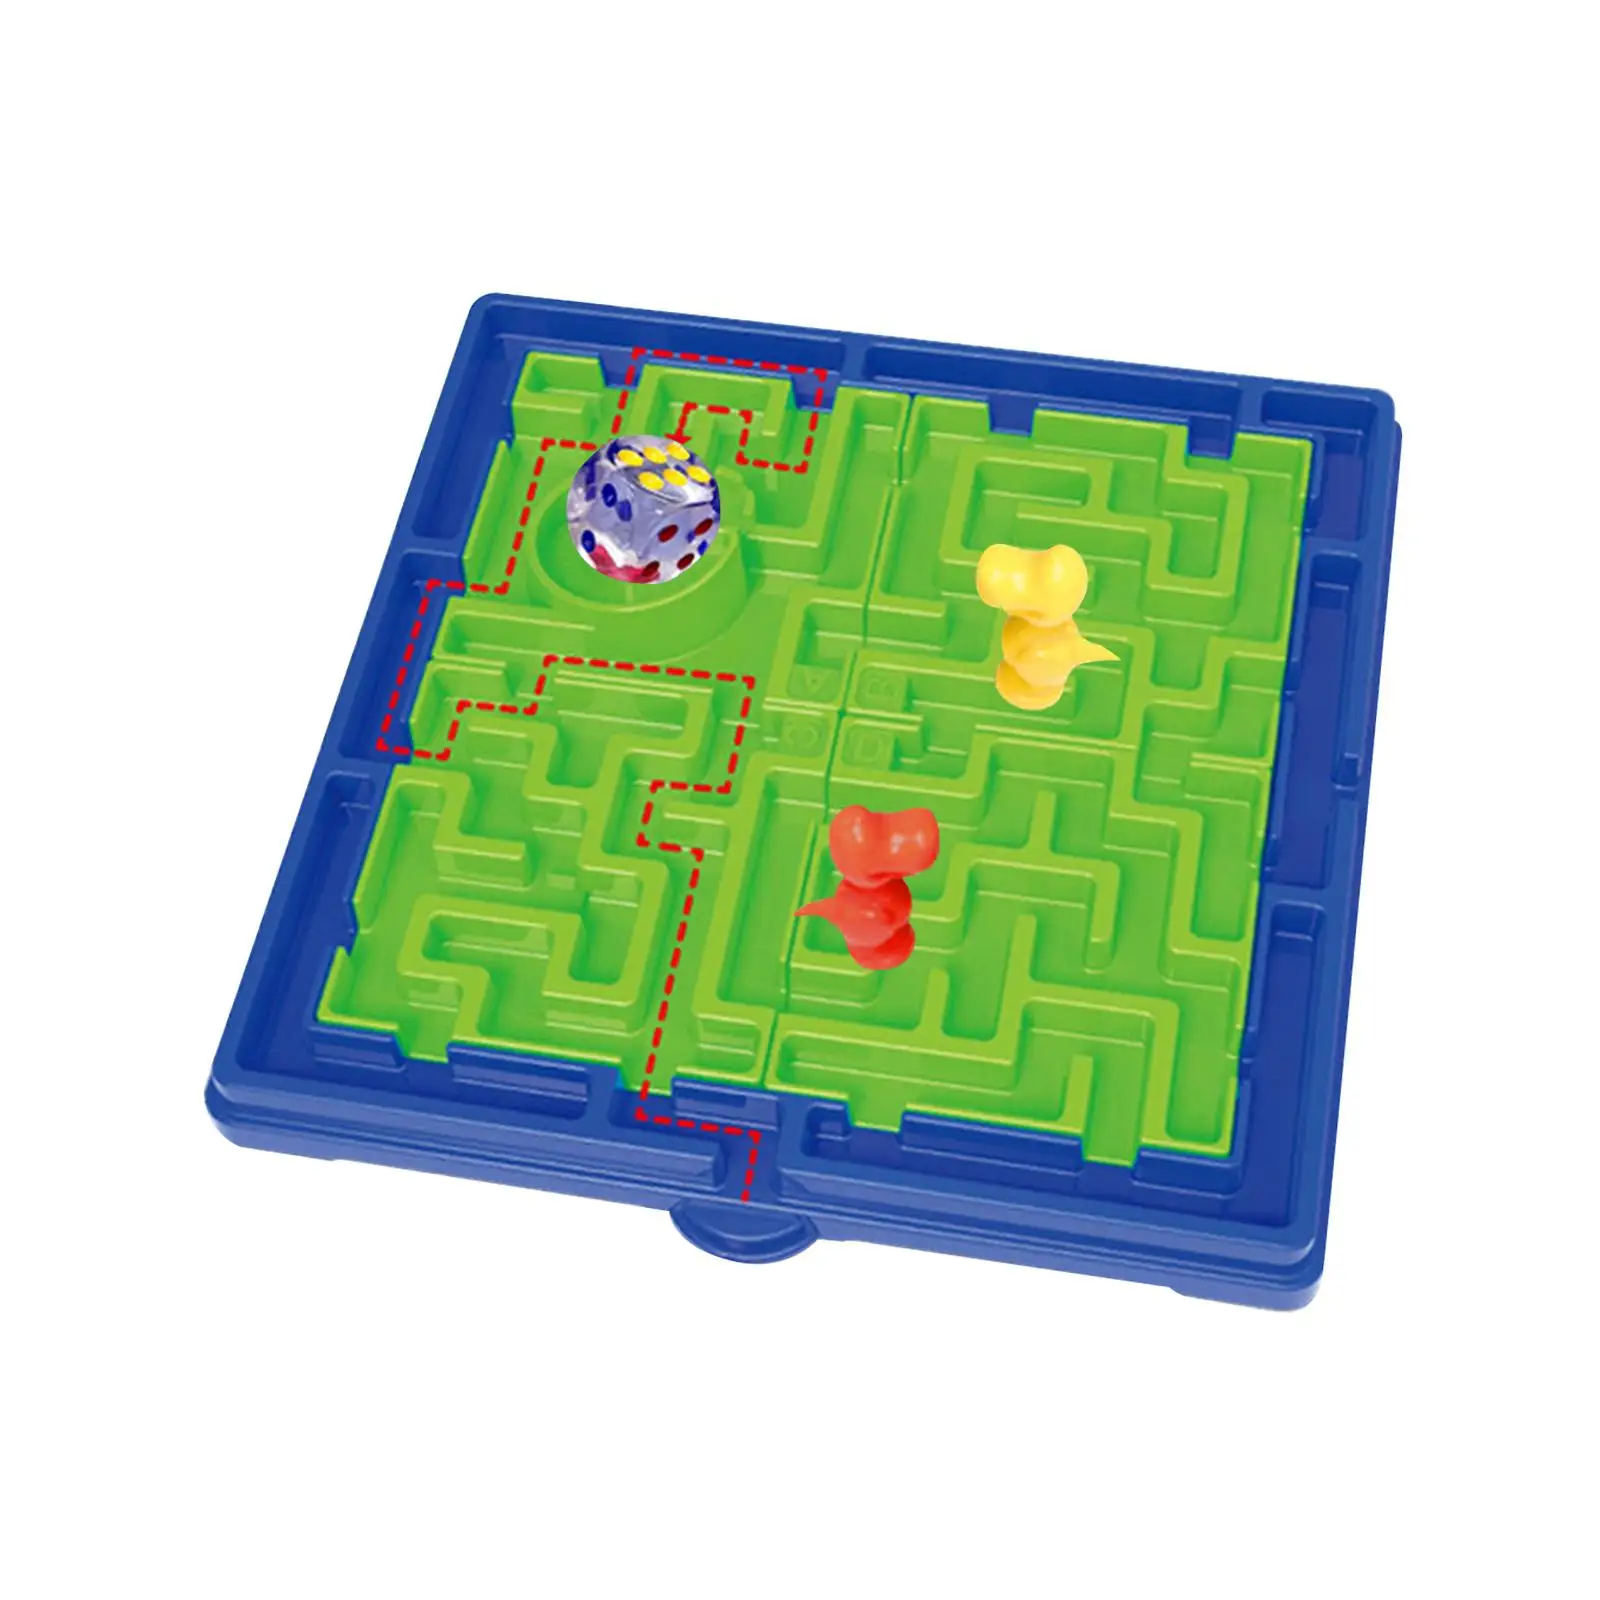 Maze Game Balance Maze Learning Game Teaching Aids Birthday Gift Educational